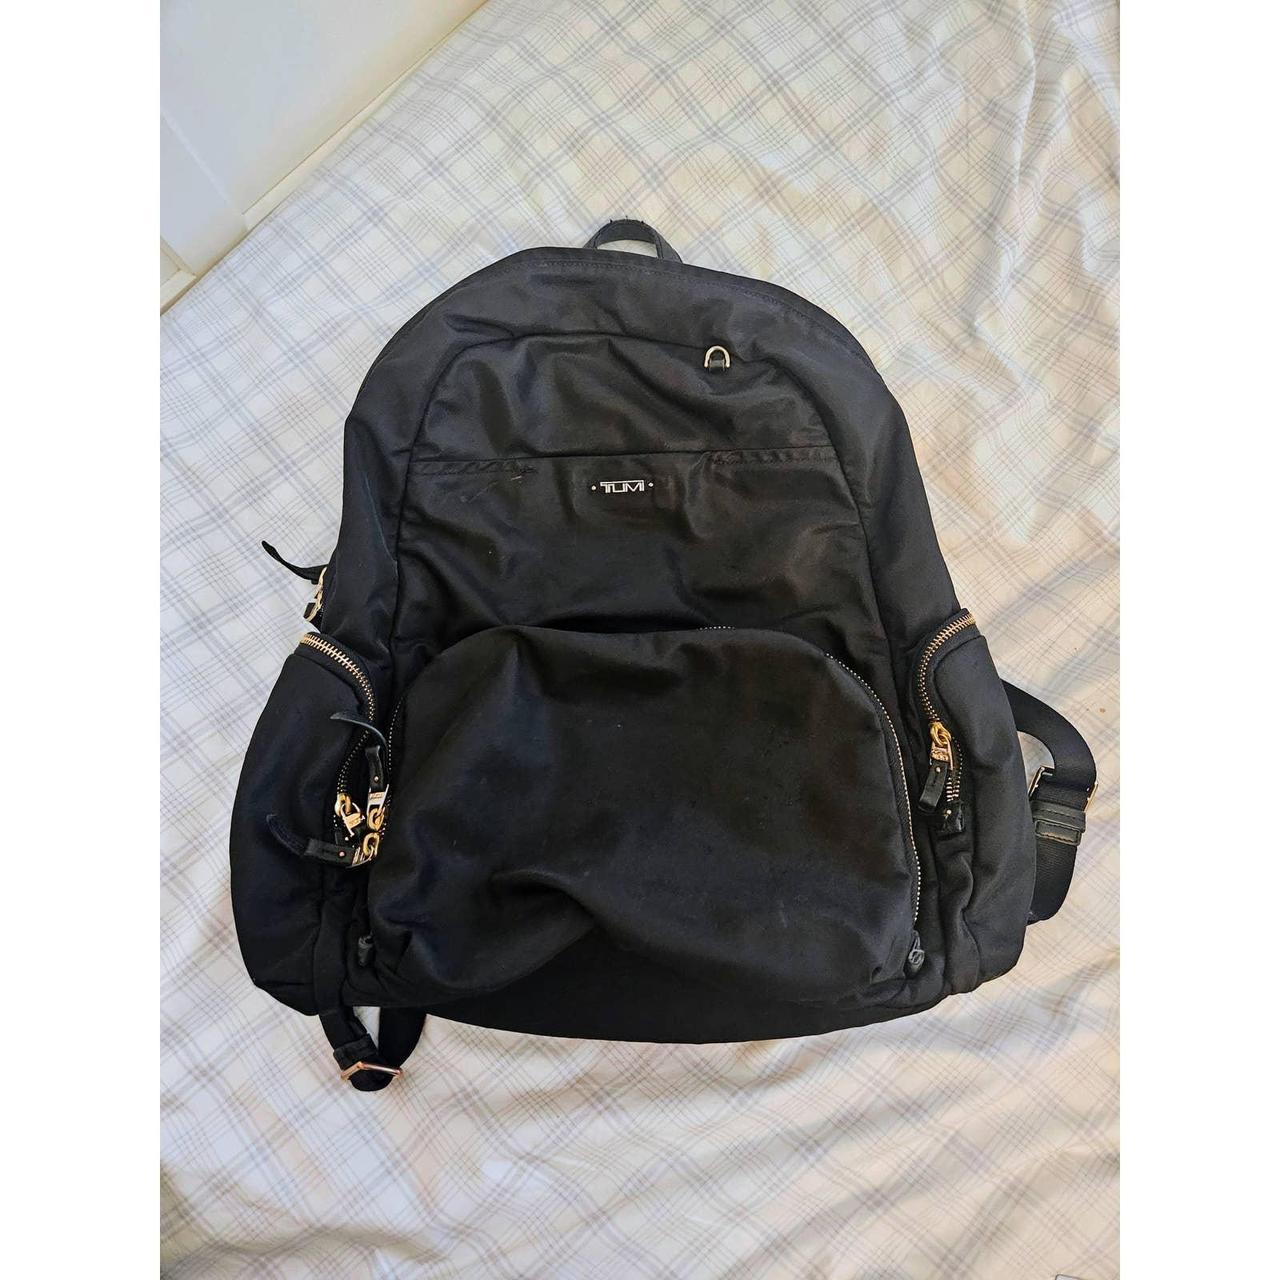 Tumi Voyageur Calais Nylon Backpack Black with Gold... - Depop